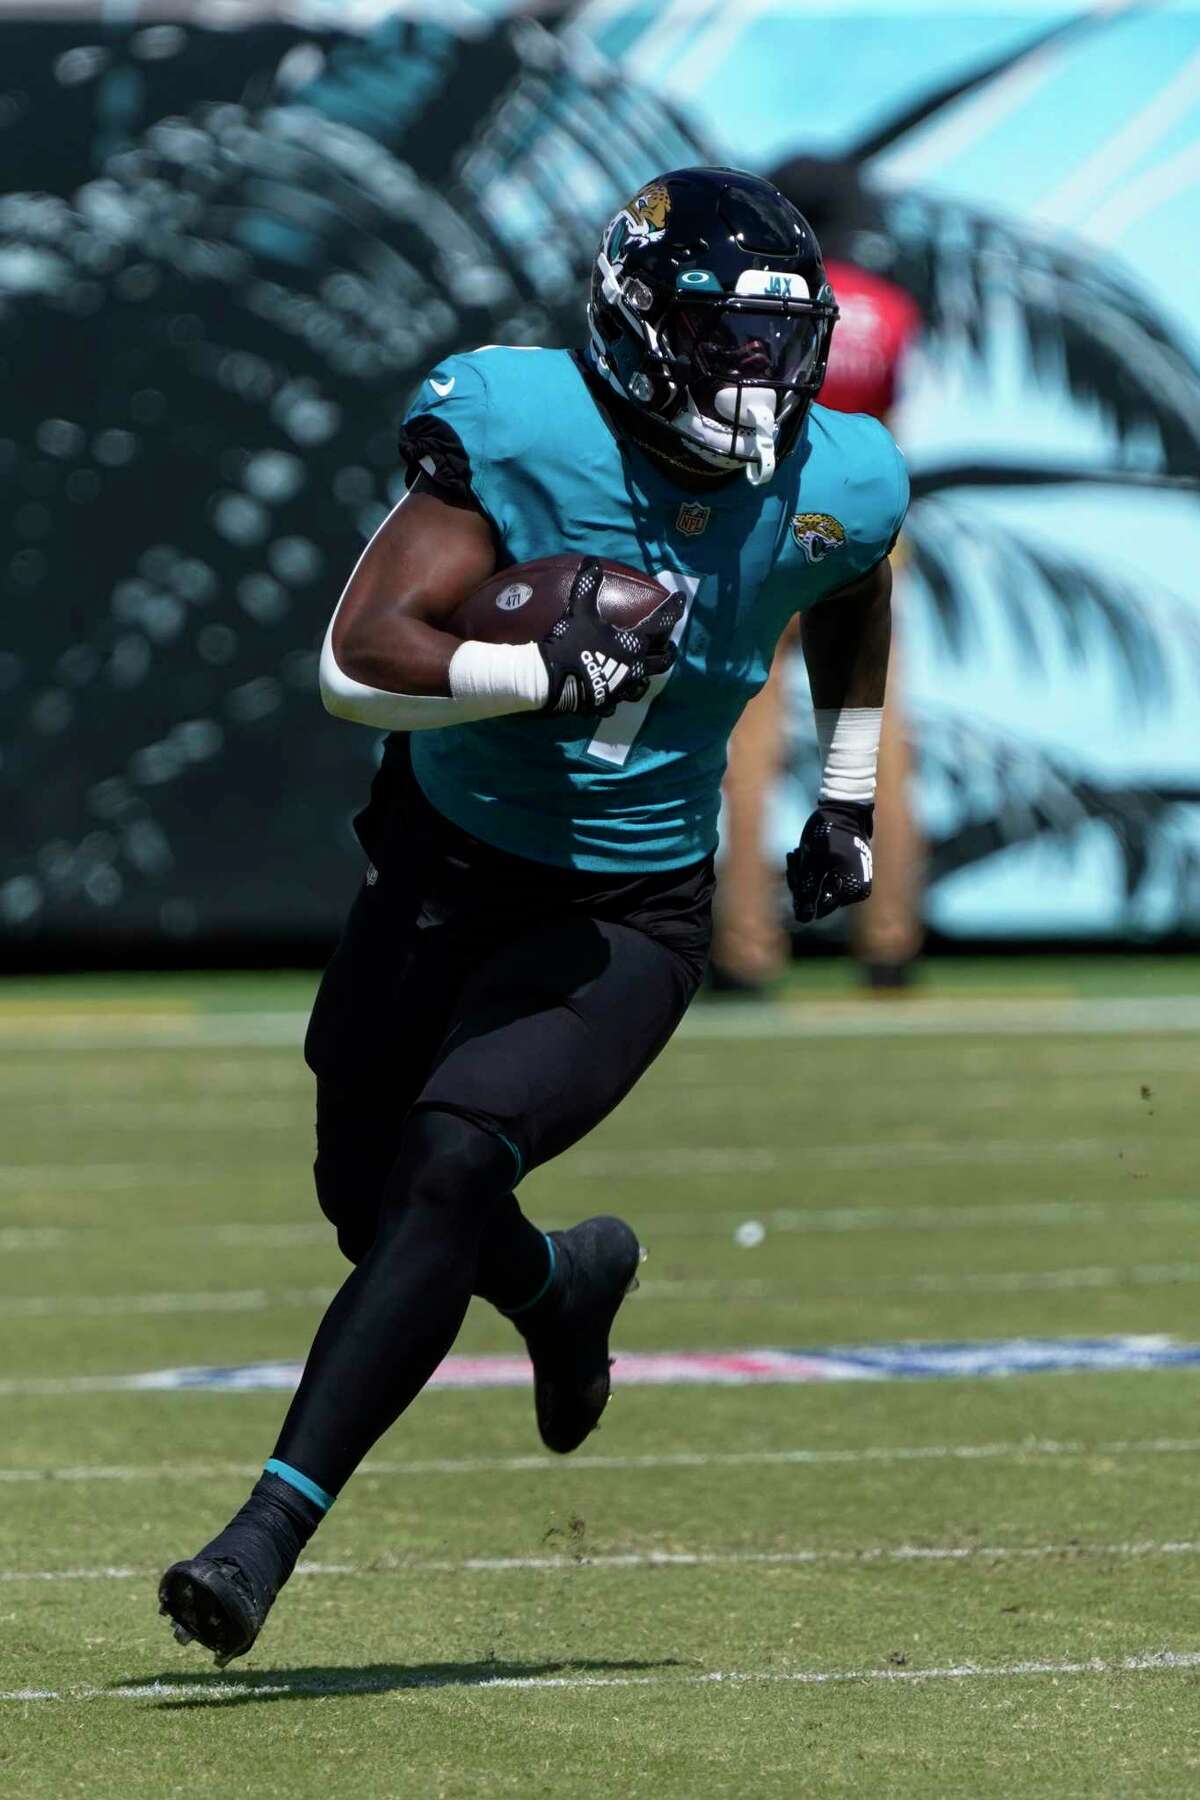 Jacksonville Jaguars running back Travis Etienne Jr. (1) runs the ball against the Houston Texans during the first half of an NFL football game in Jacksonville, Fla., Sunday, Oct. 9, 2022. (AP Photo/John Raoux)